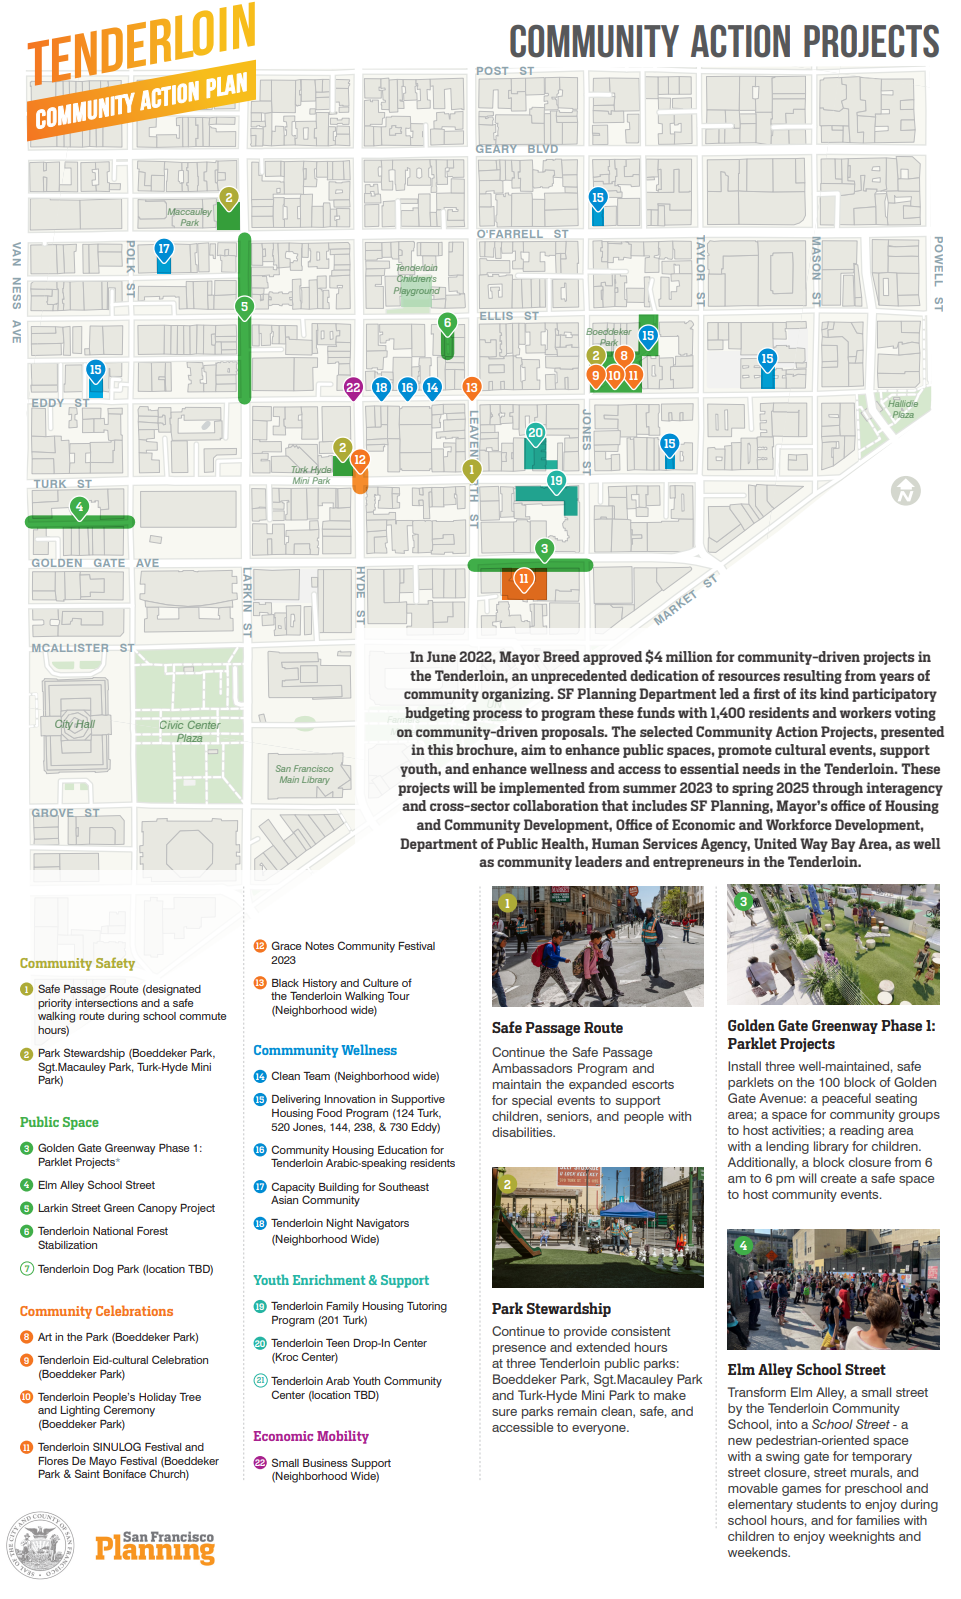 Snapshot of the front page of the Tenderloin Community Action Projects